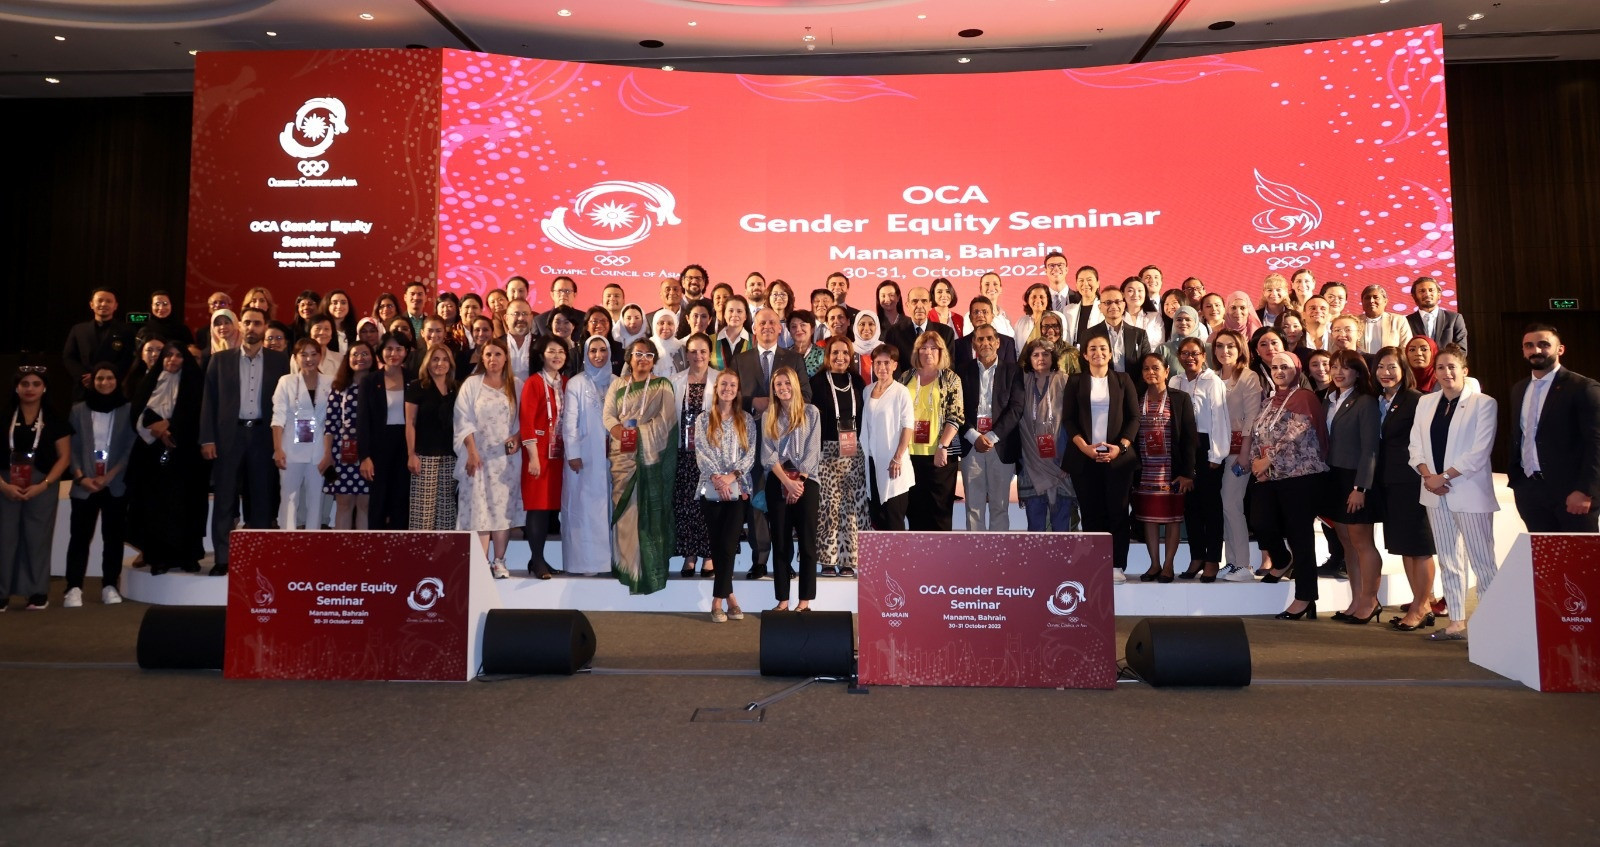 Grassroots strategies main topic on final day of OCA Gender Equity Seminar